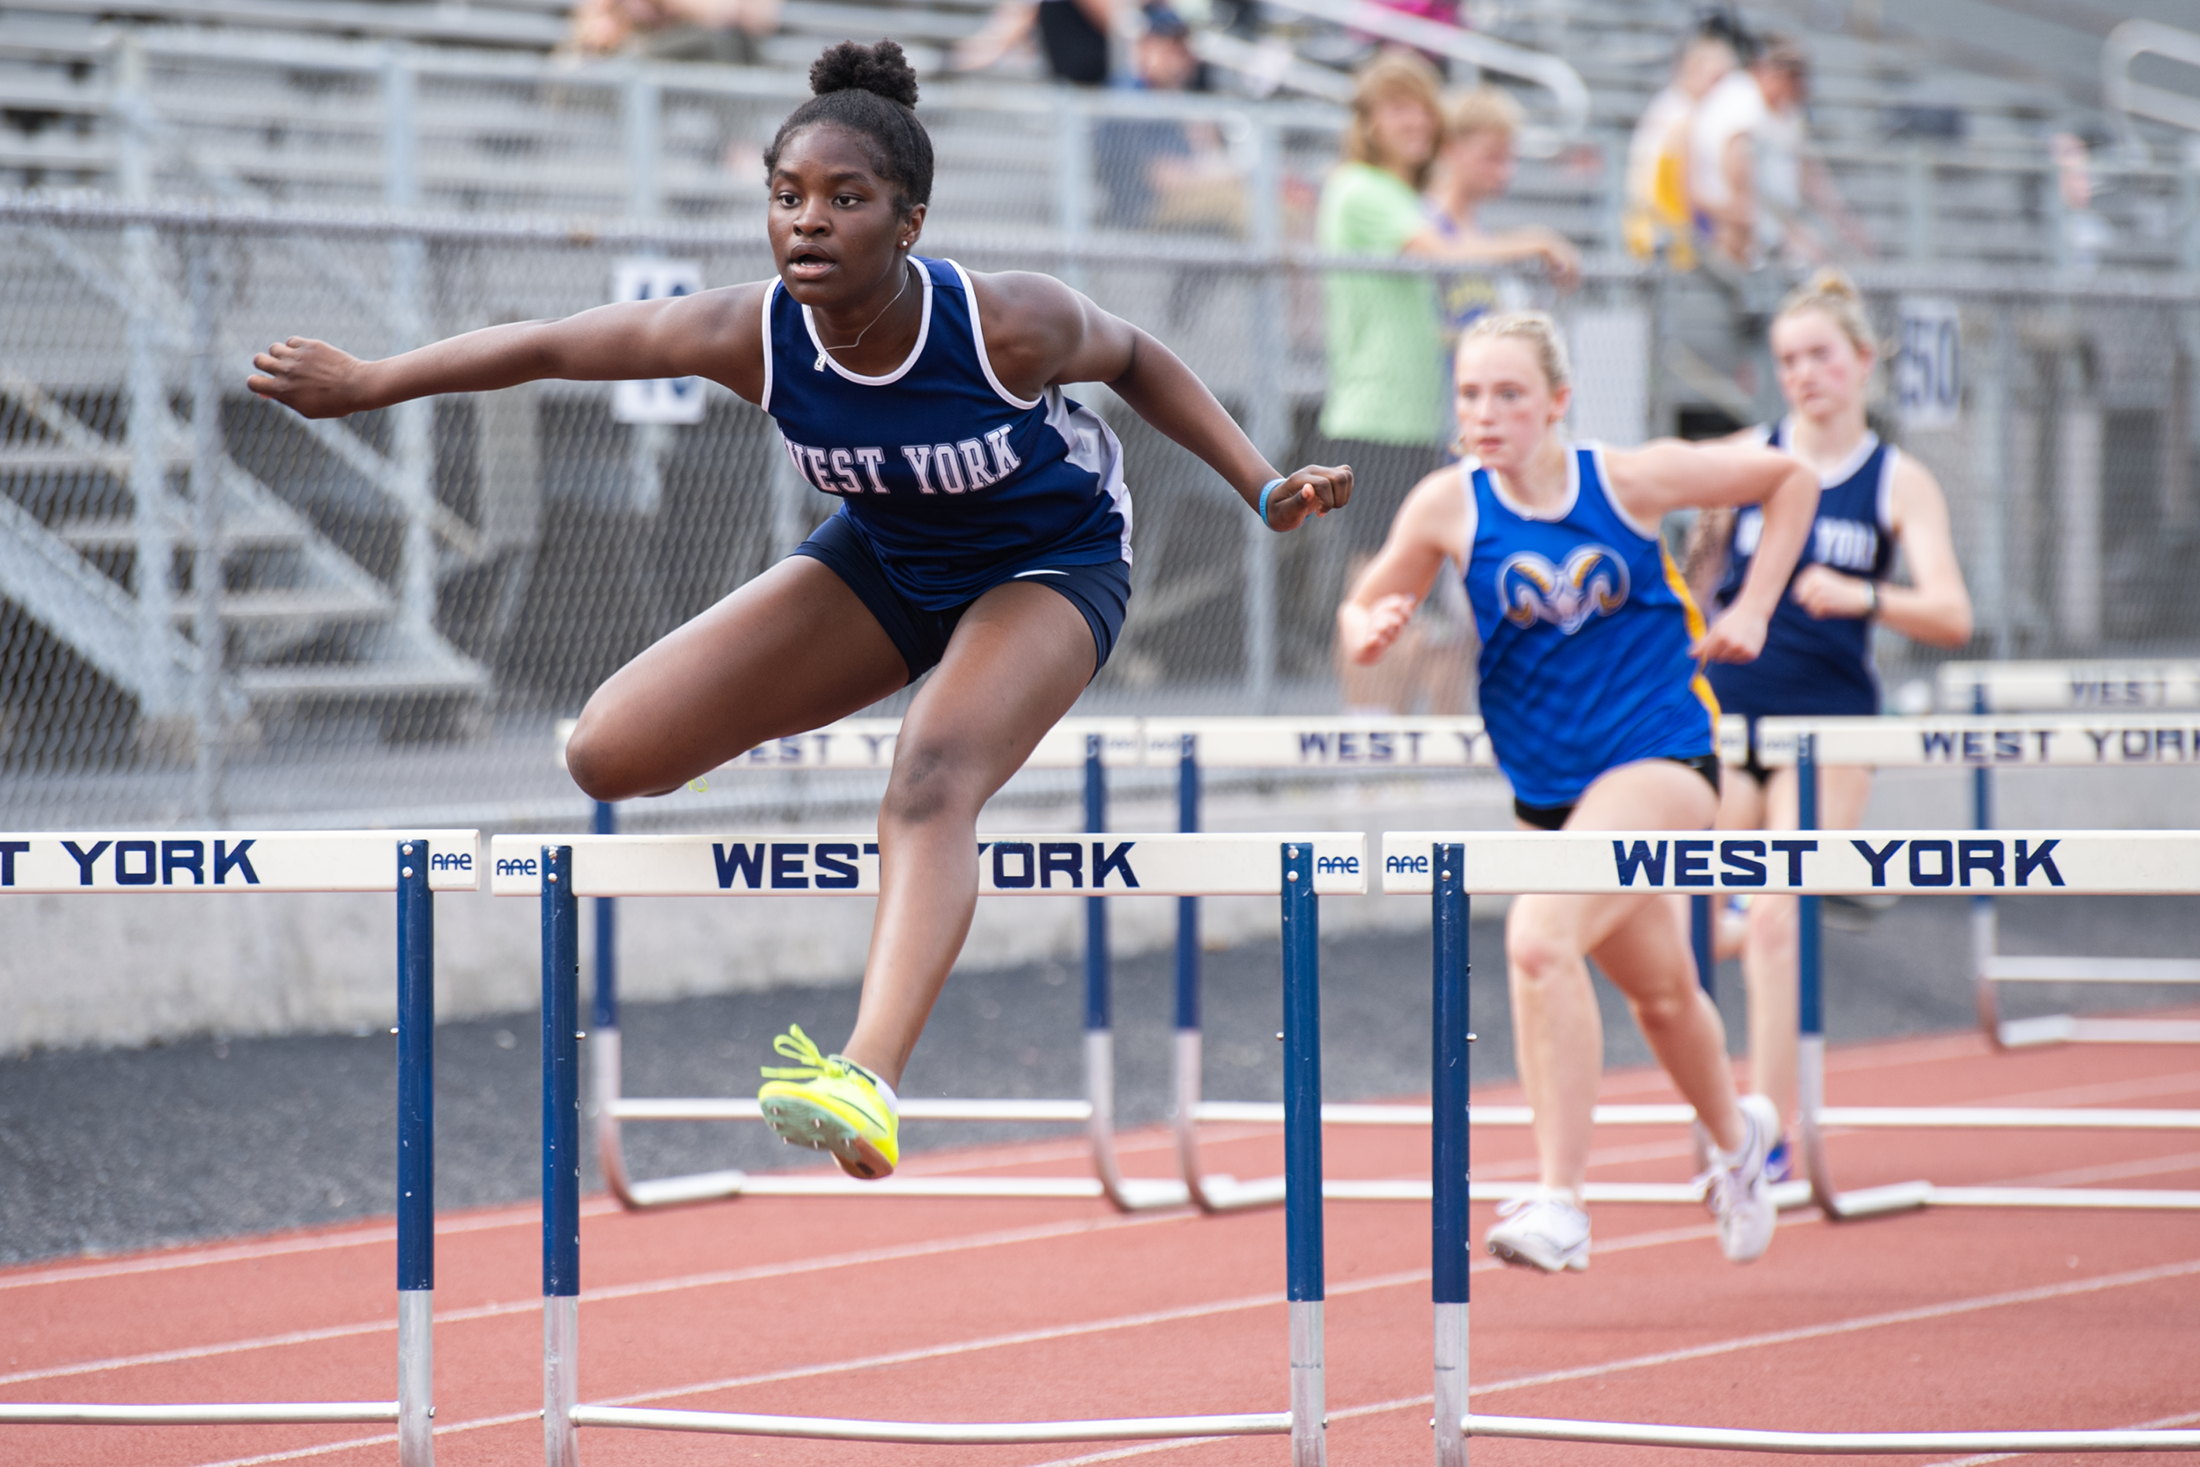 Talented underclassmen lead West York to first league division title in program history